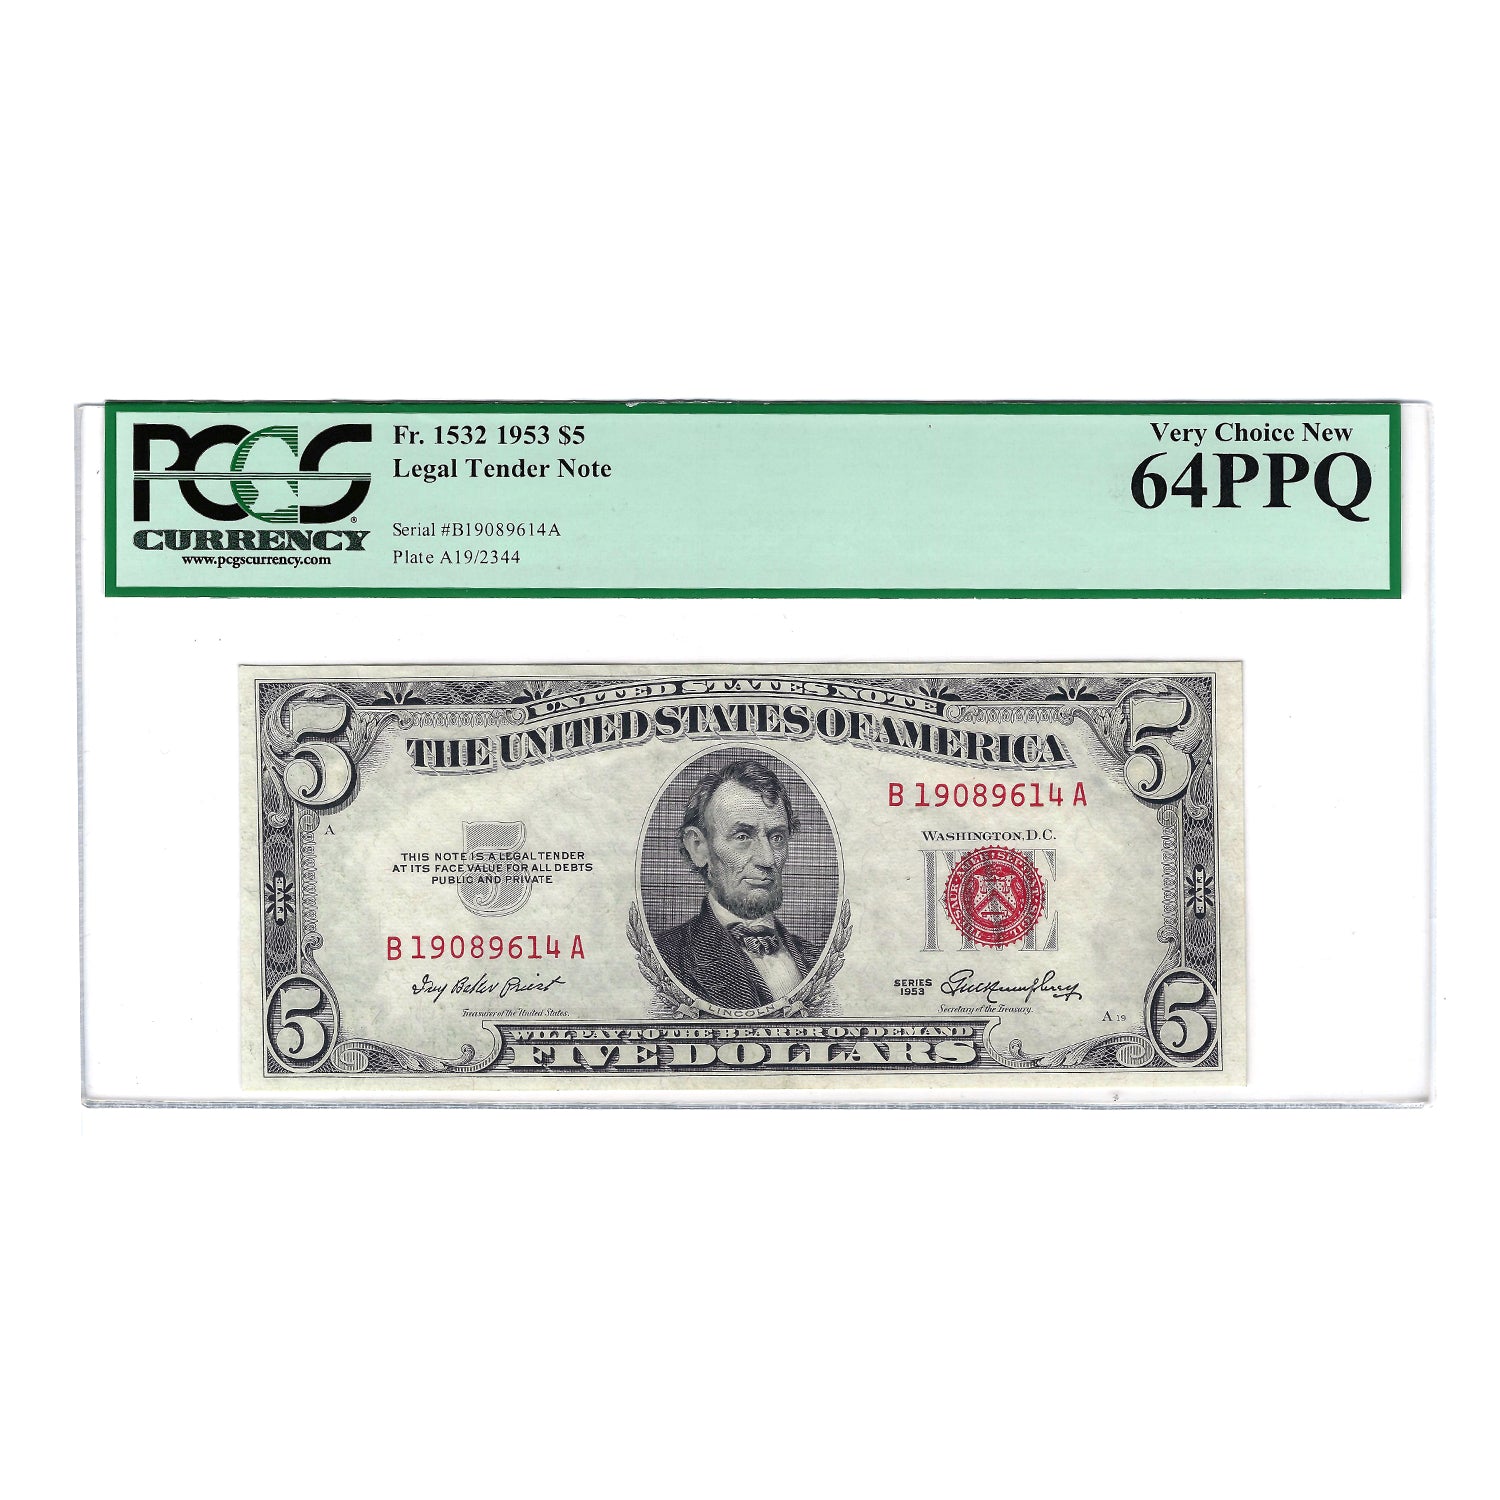 1953 $5 Small Size Legal Tender Note, Priest-Humphrey, PCGS Very Choice New 64 PPQ